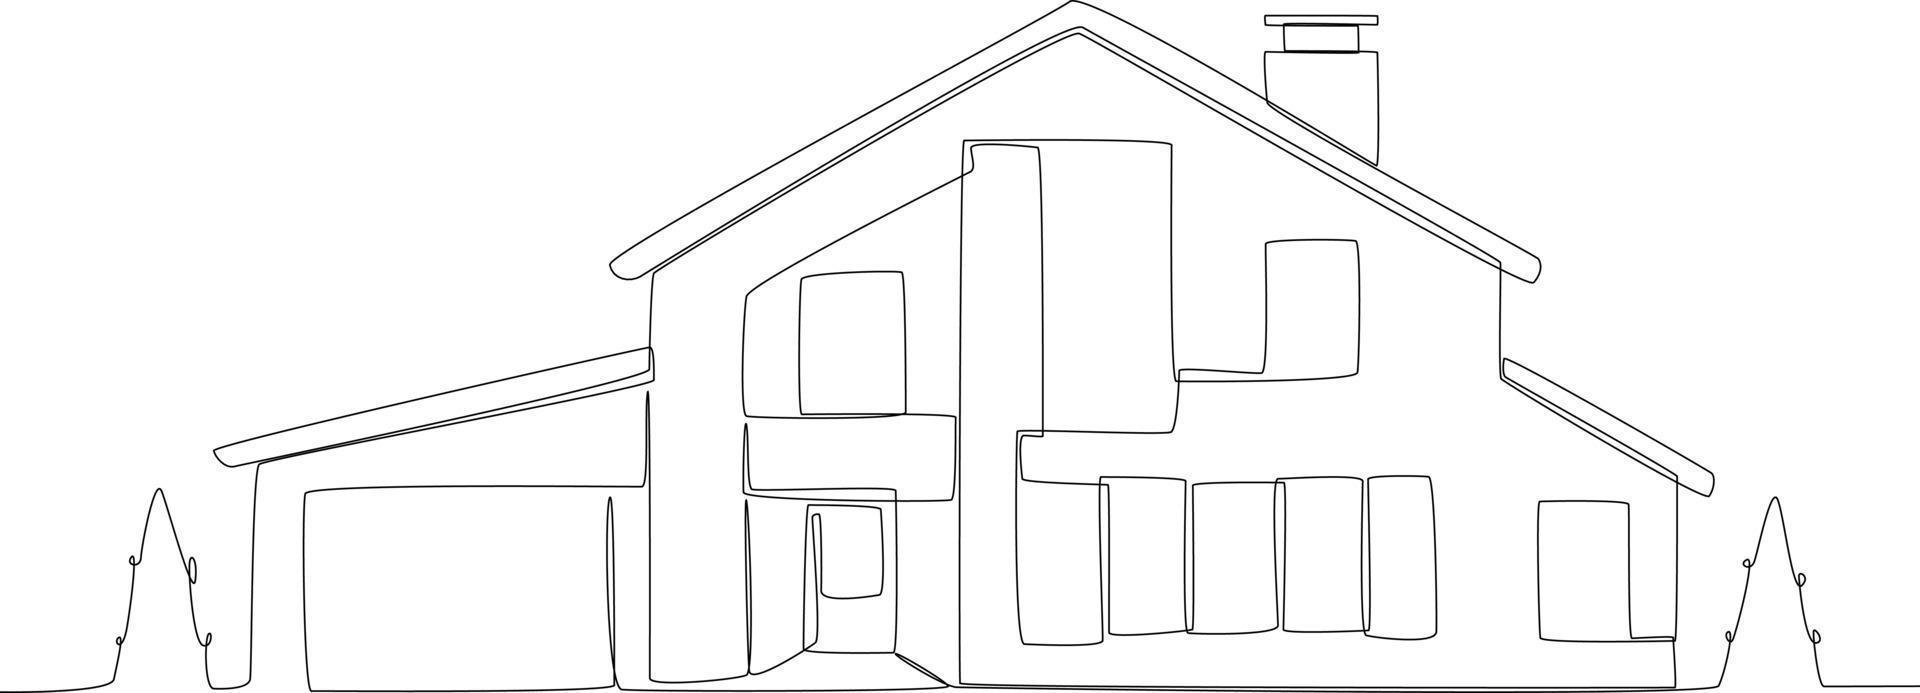 A family house in the city vector